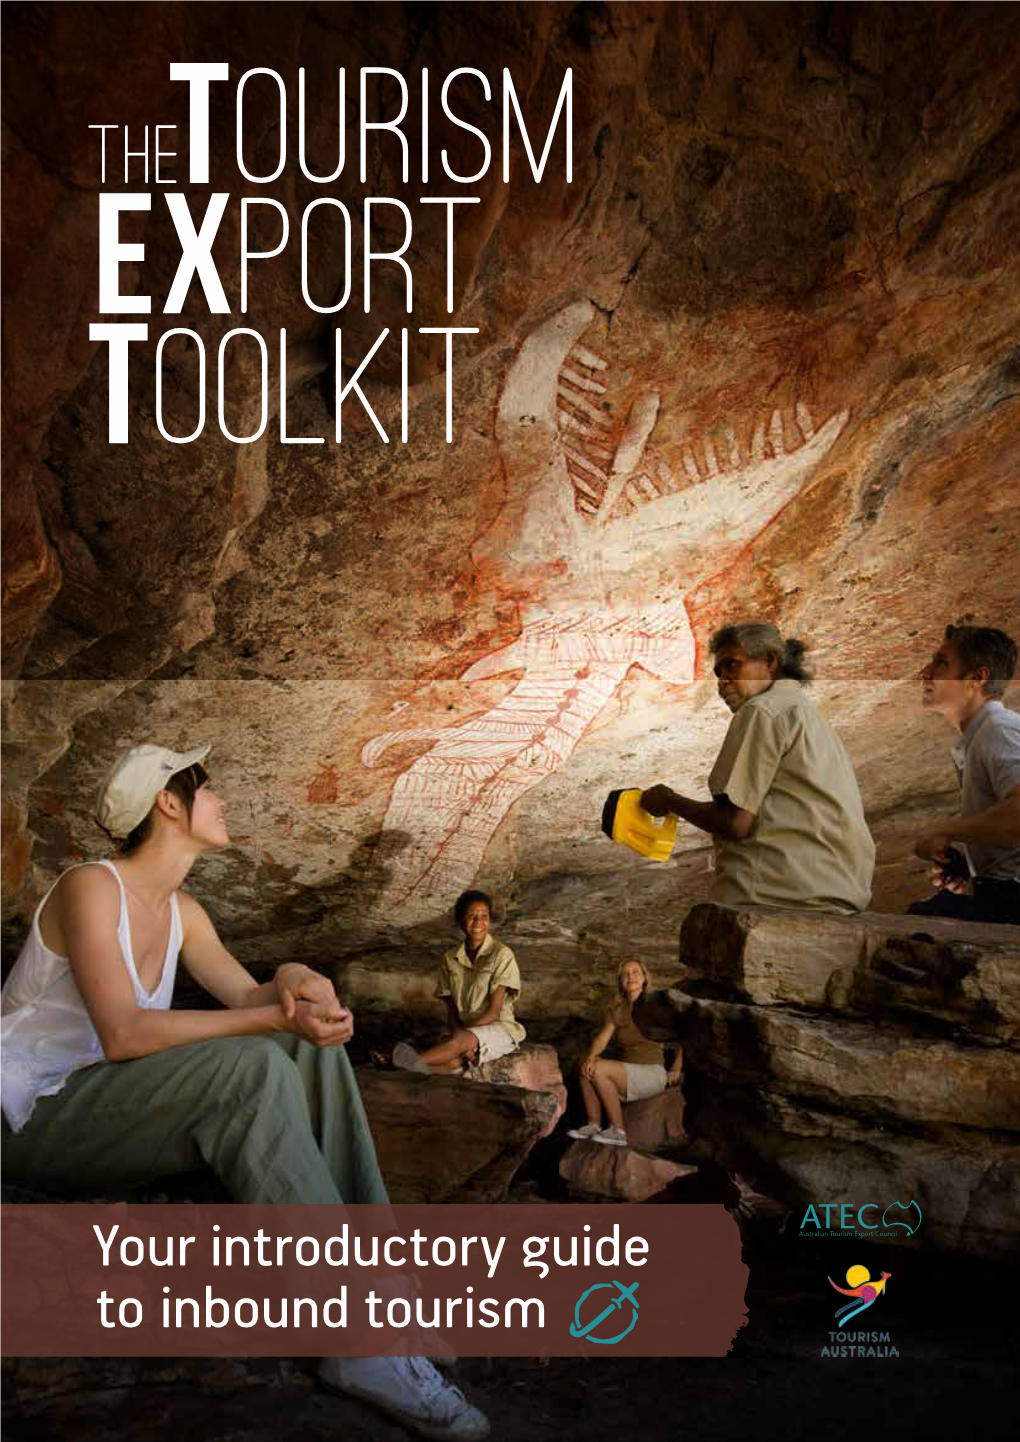 TOURISM EXPORT TOOLKIT (TEXT) Your Introductory Guide to Inbound Tourism in Australia